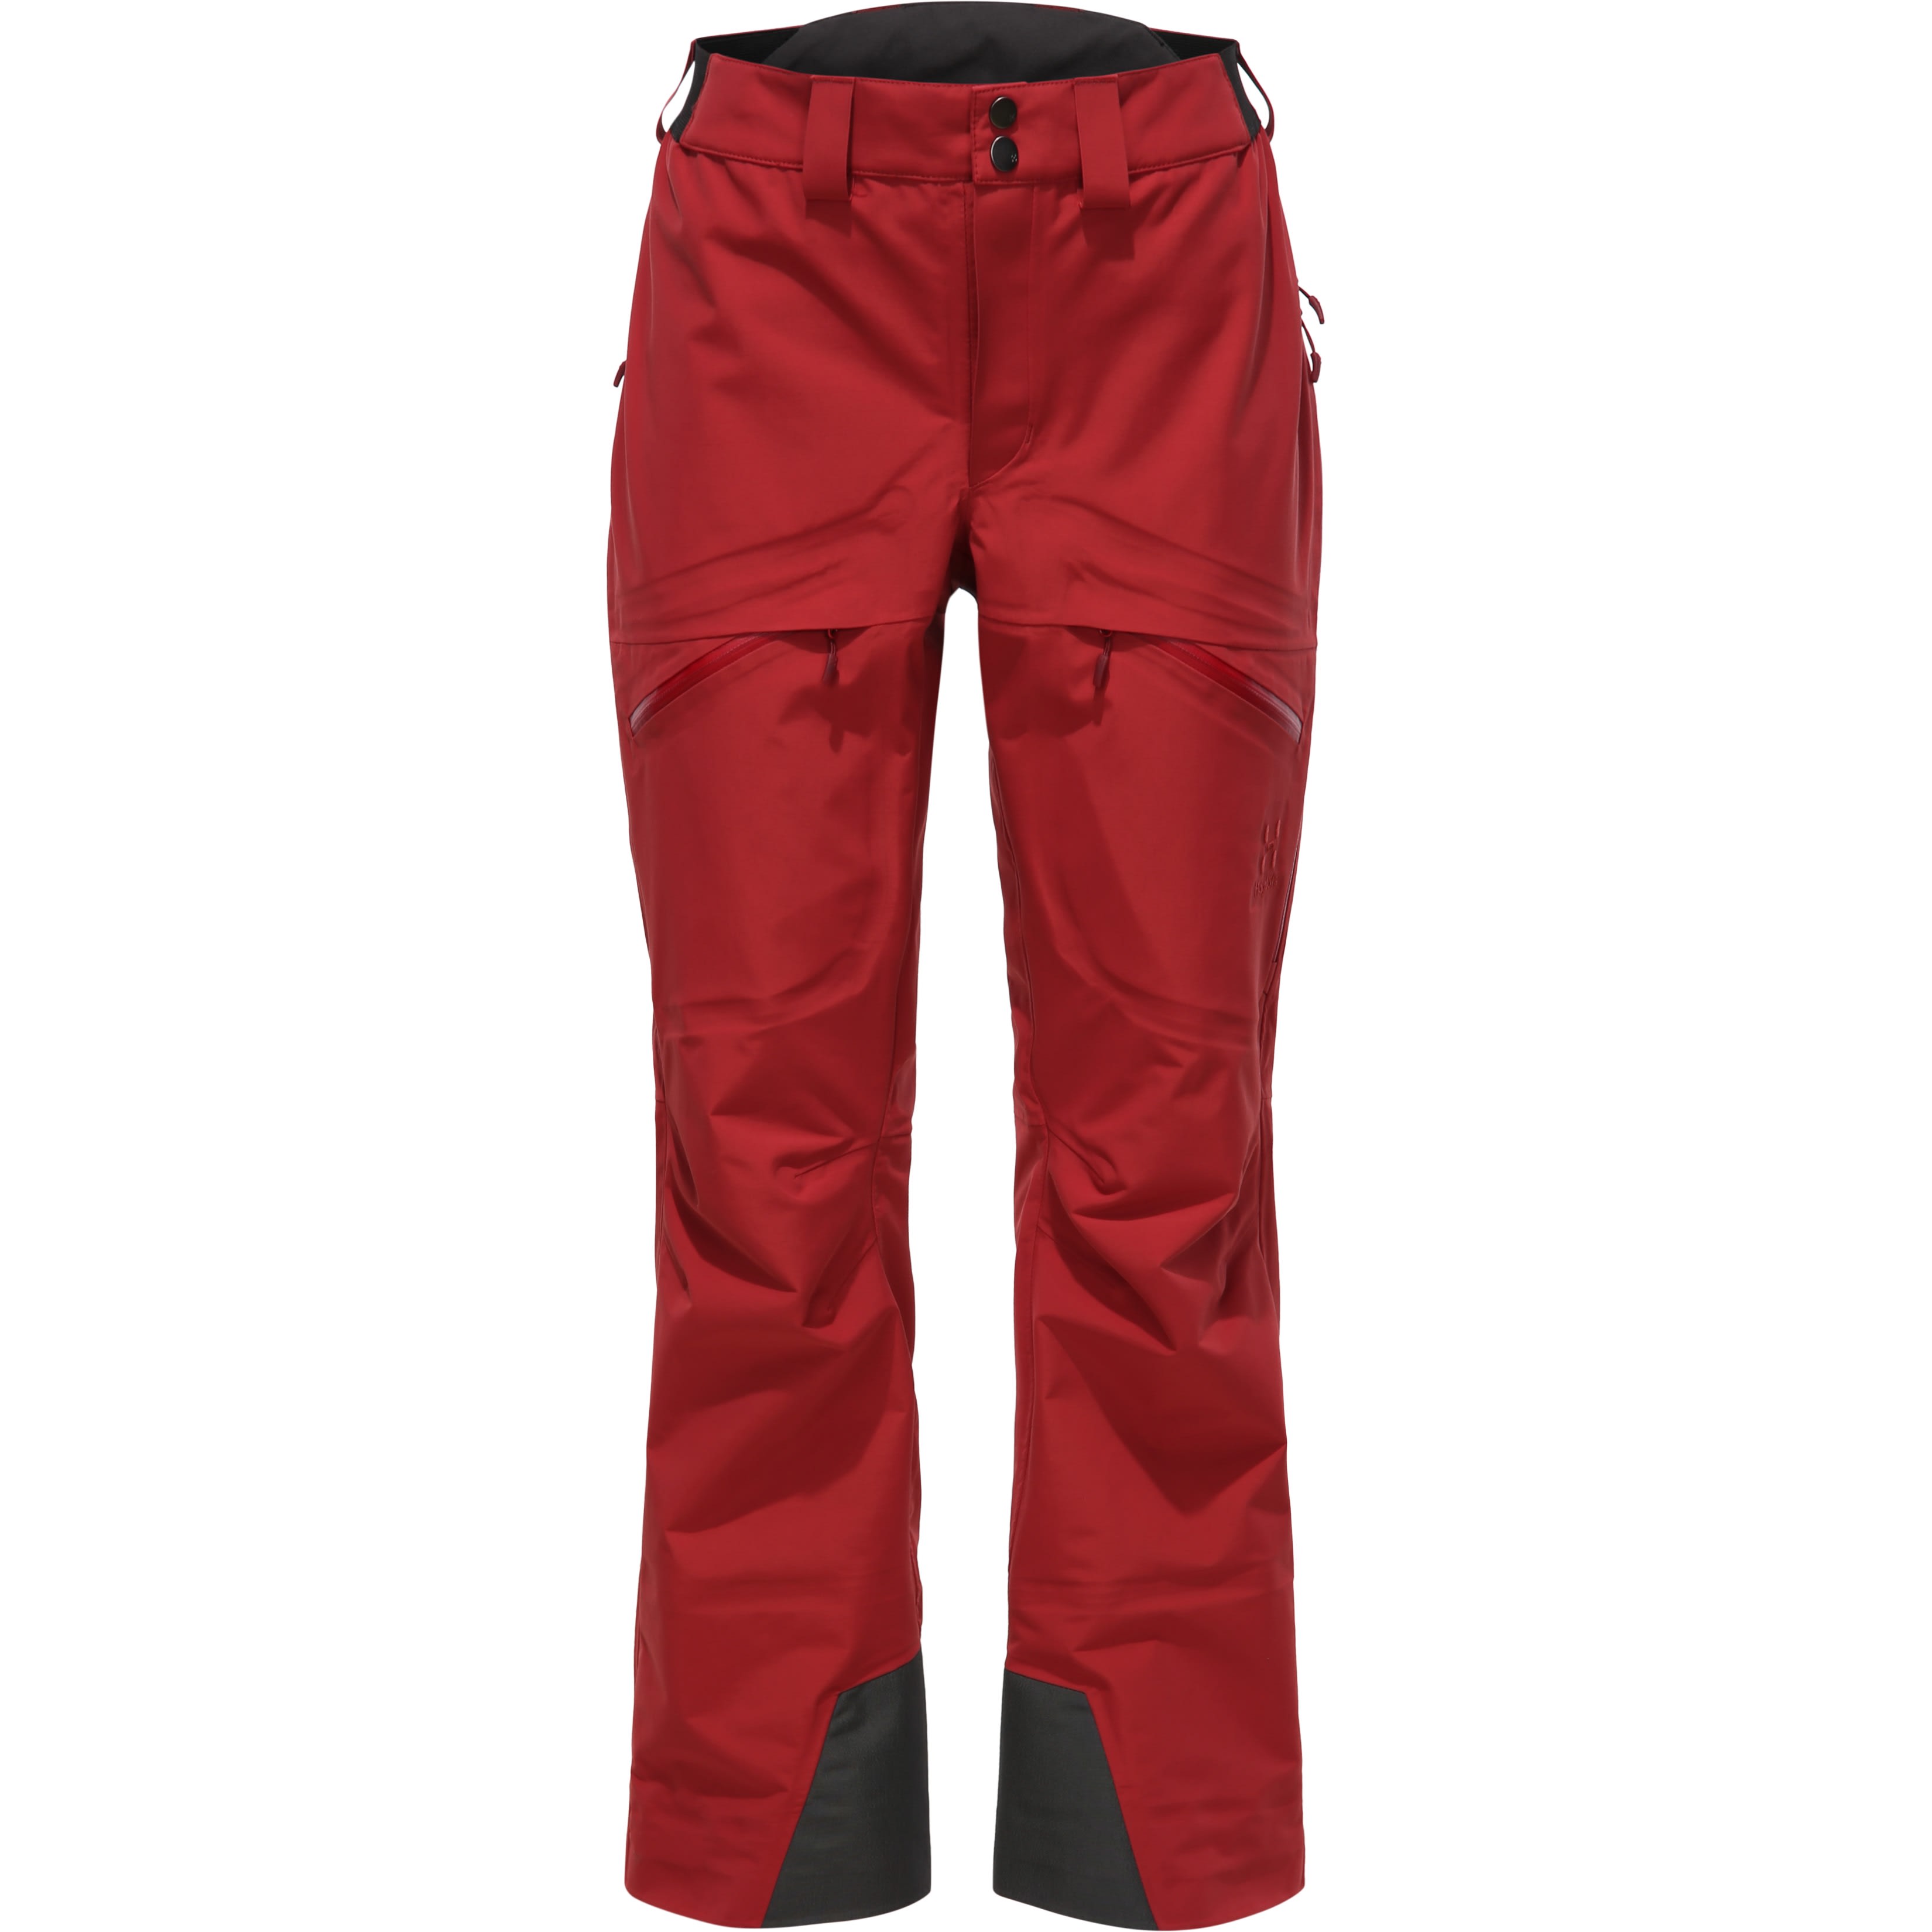 Buy Haglöfs Khione 3L PROOF Pant Women from Outnorth